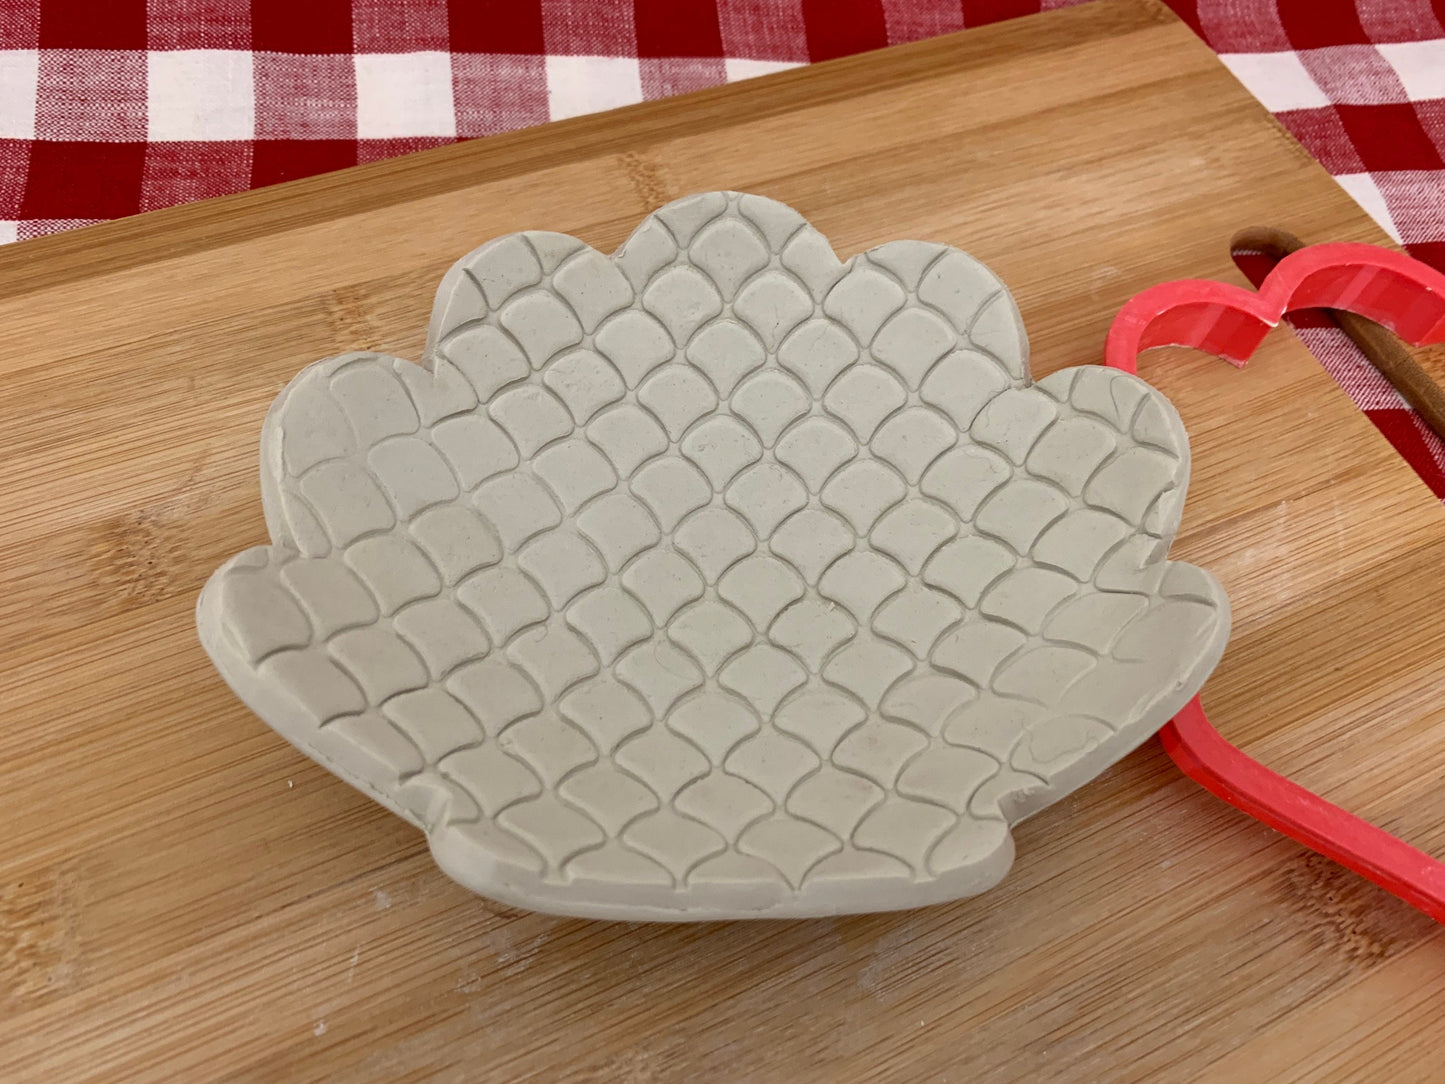 Cookie / Clay Cutter, Seashell, Fondant, Clay, Pottery Tool choose size up to 11" wide, extra large cutters, Shell design